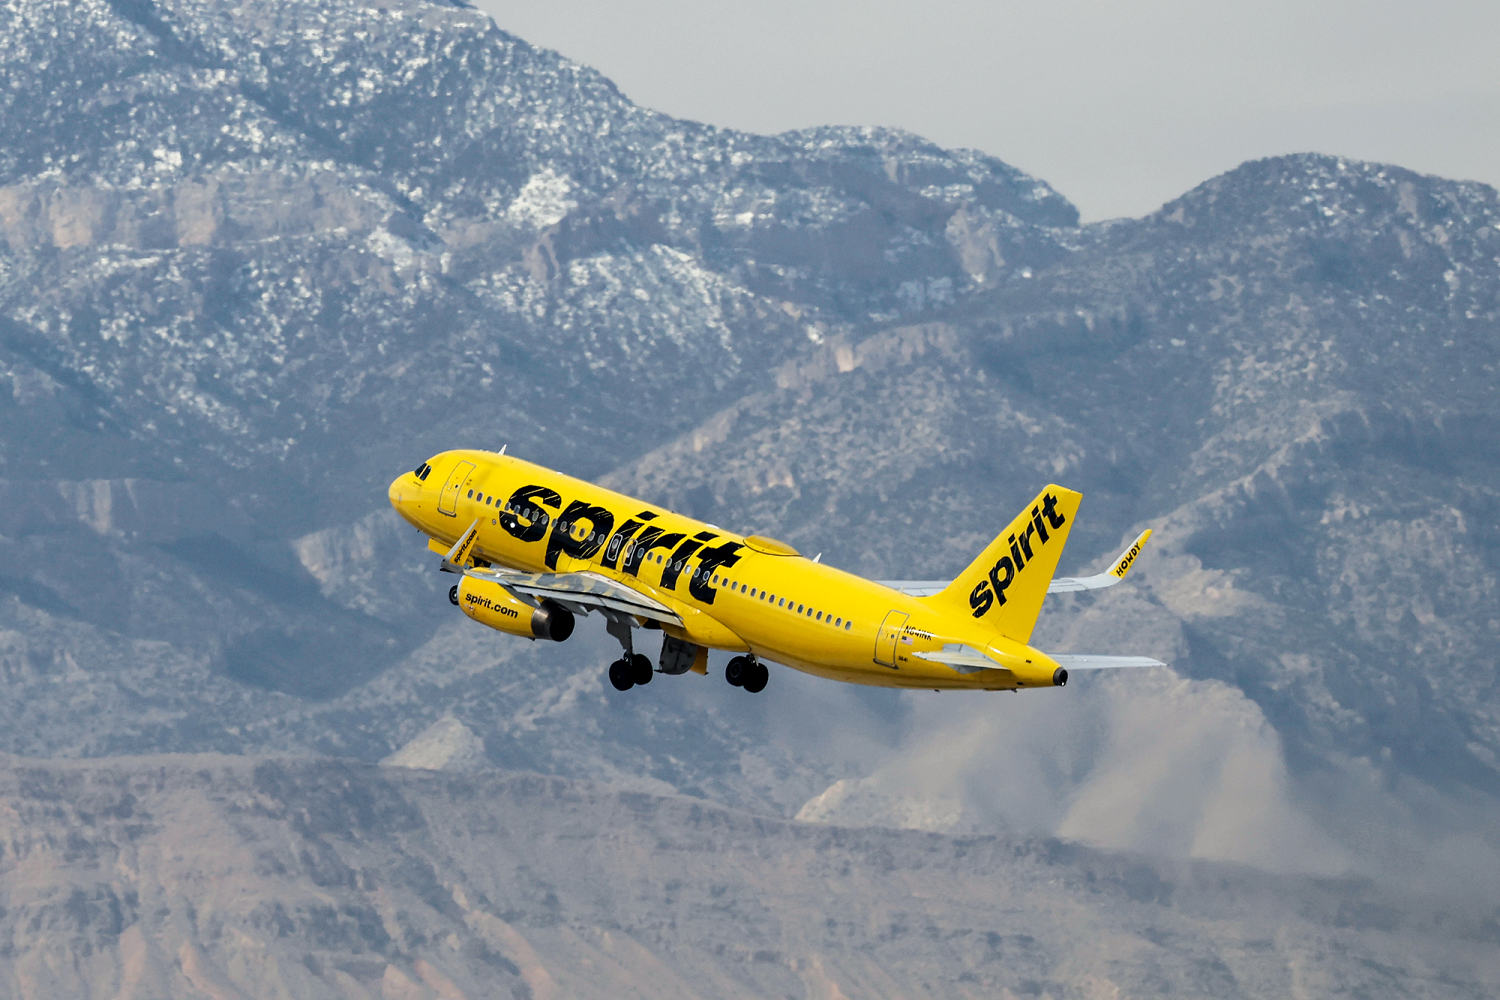 Budget airline Spirit is trying to go upmarket — and blocking middle seats